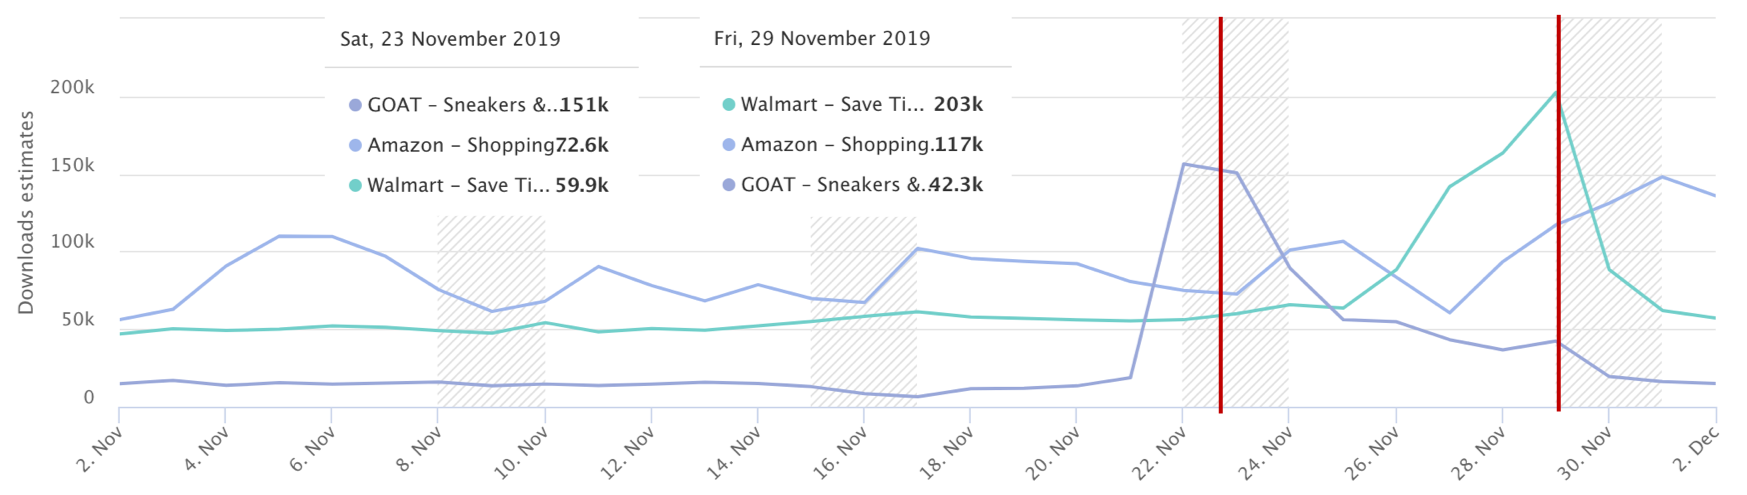 AppTweak ASO Tool - Rankings of Goat, Amazon and Walmart in November 2019 on the Apple Store - Category Shopping